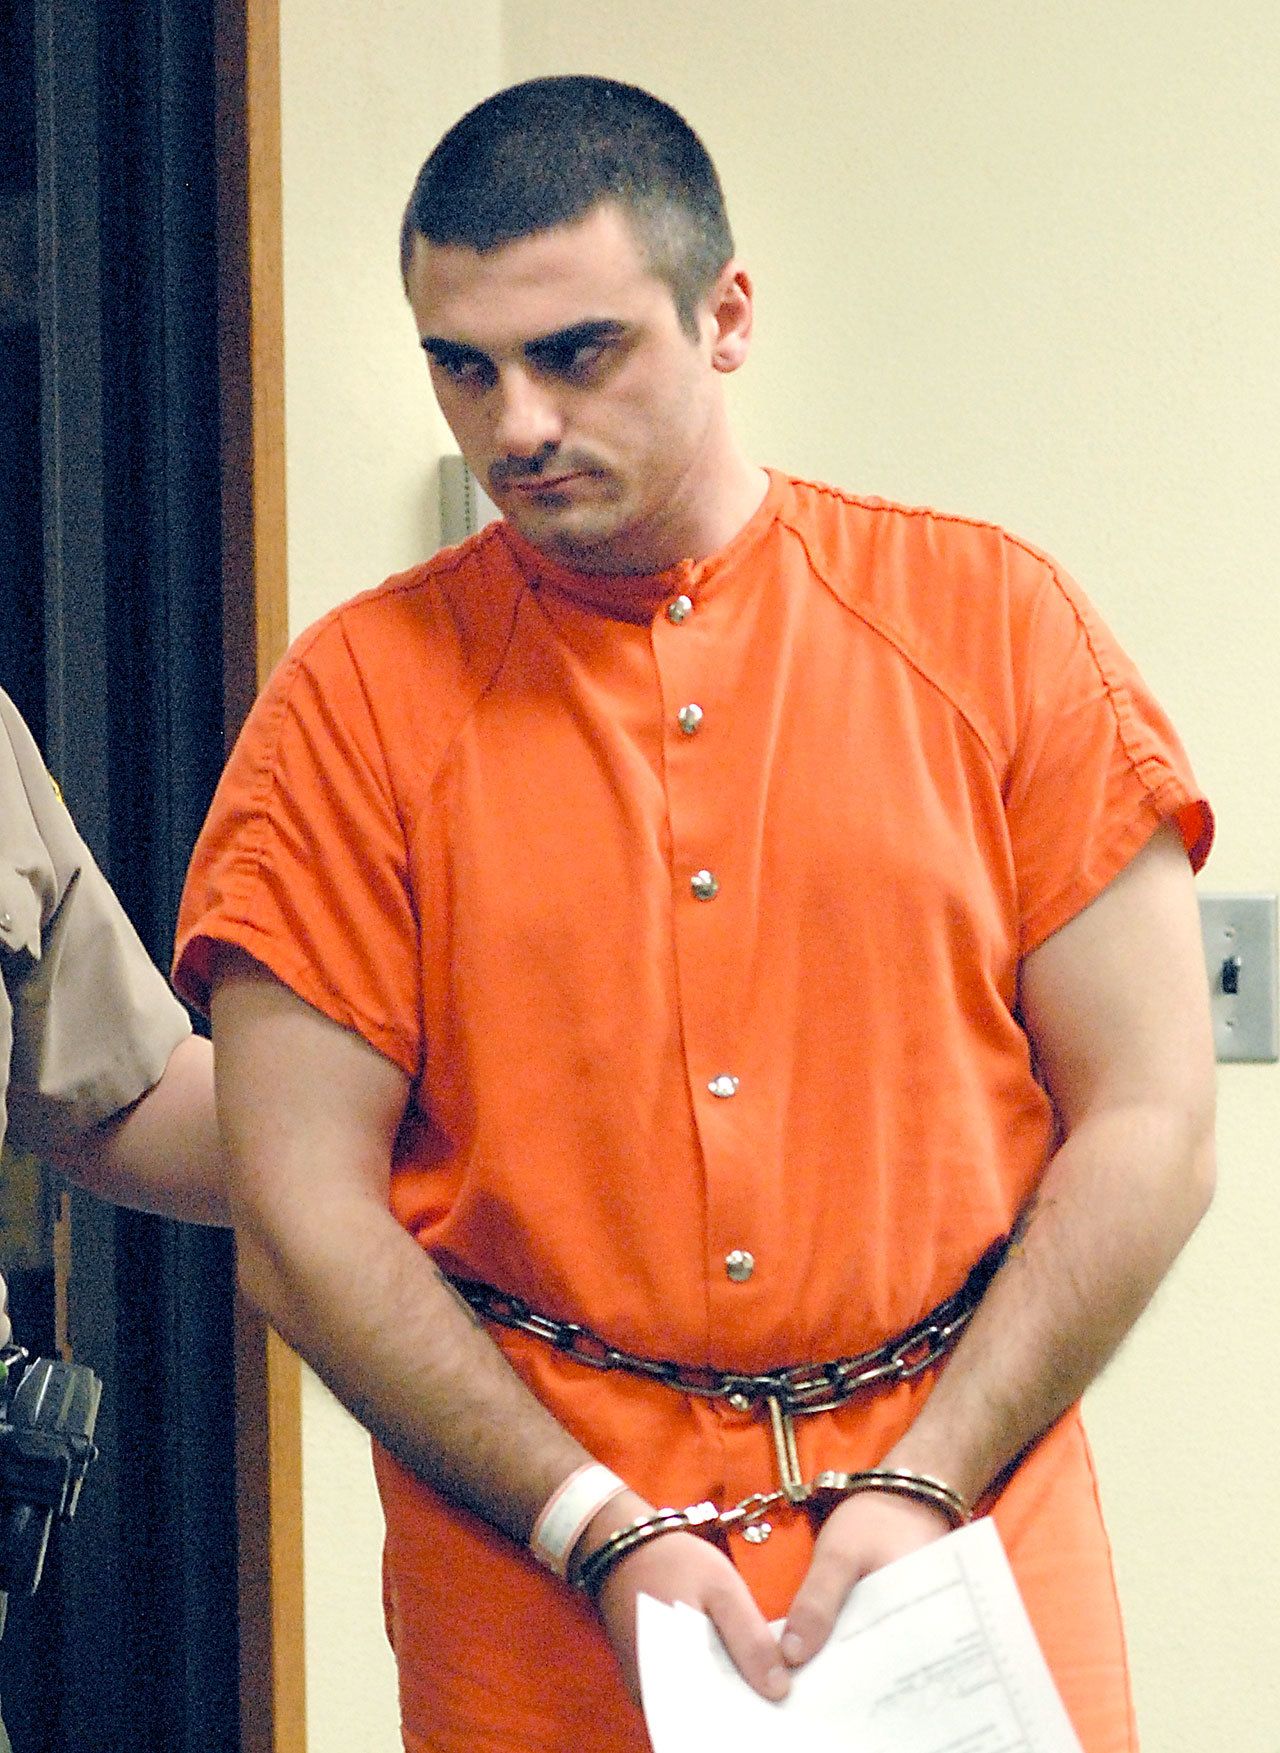 Shay Clinton Darrow makes his first appearance in Clallam County Superior Court on Friday on a charge of second-degree murder in connection with the shooting death of his father, Clint Darrow, on Thursday in Port Angeles. (Keith Thorpe/Peninsula Daily News)